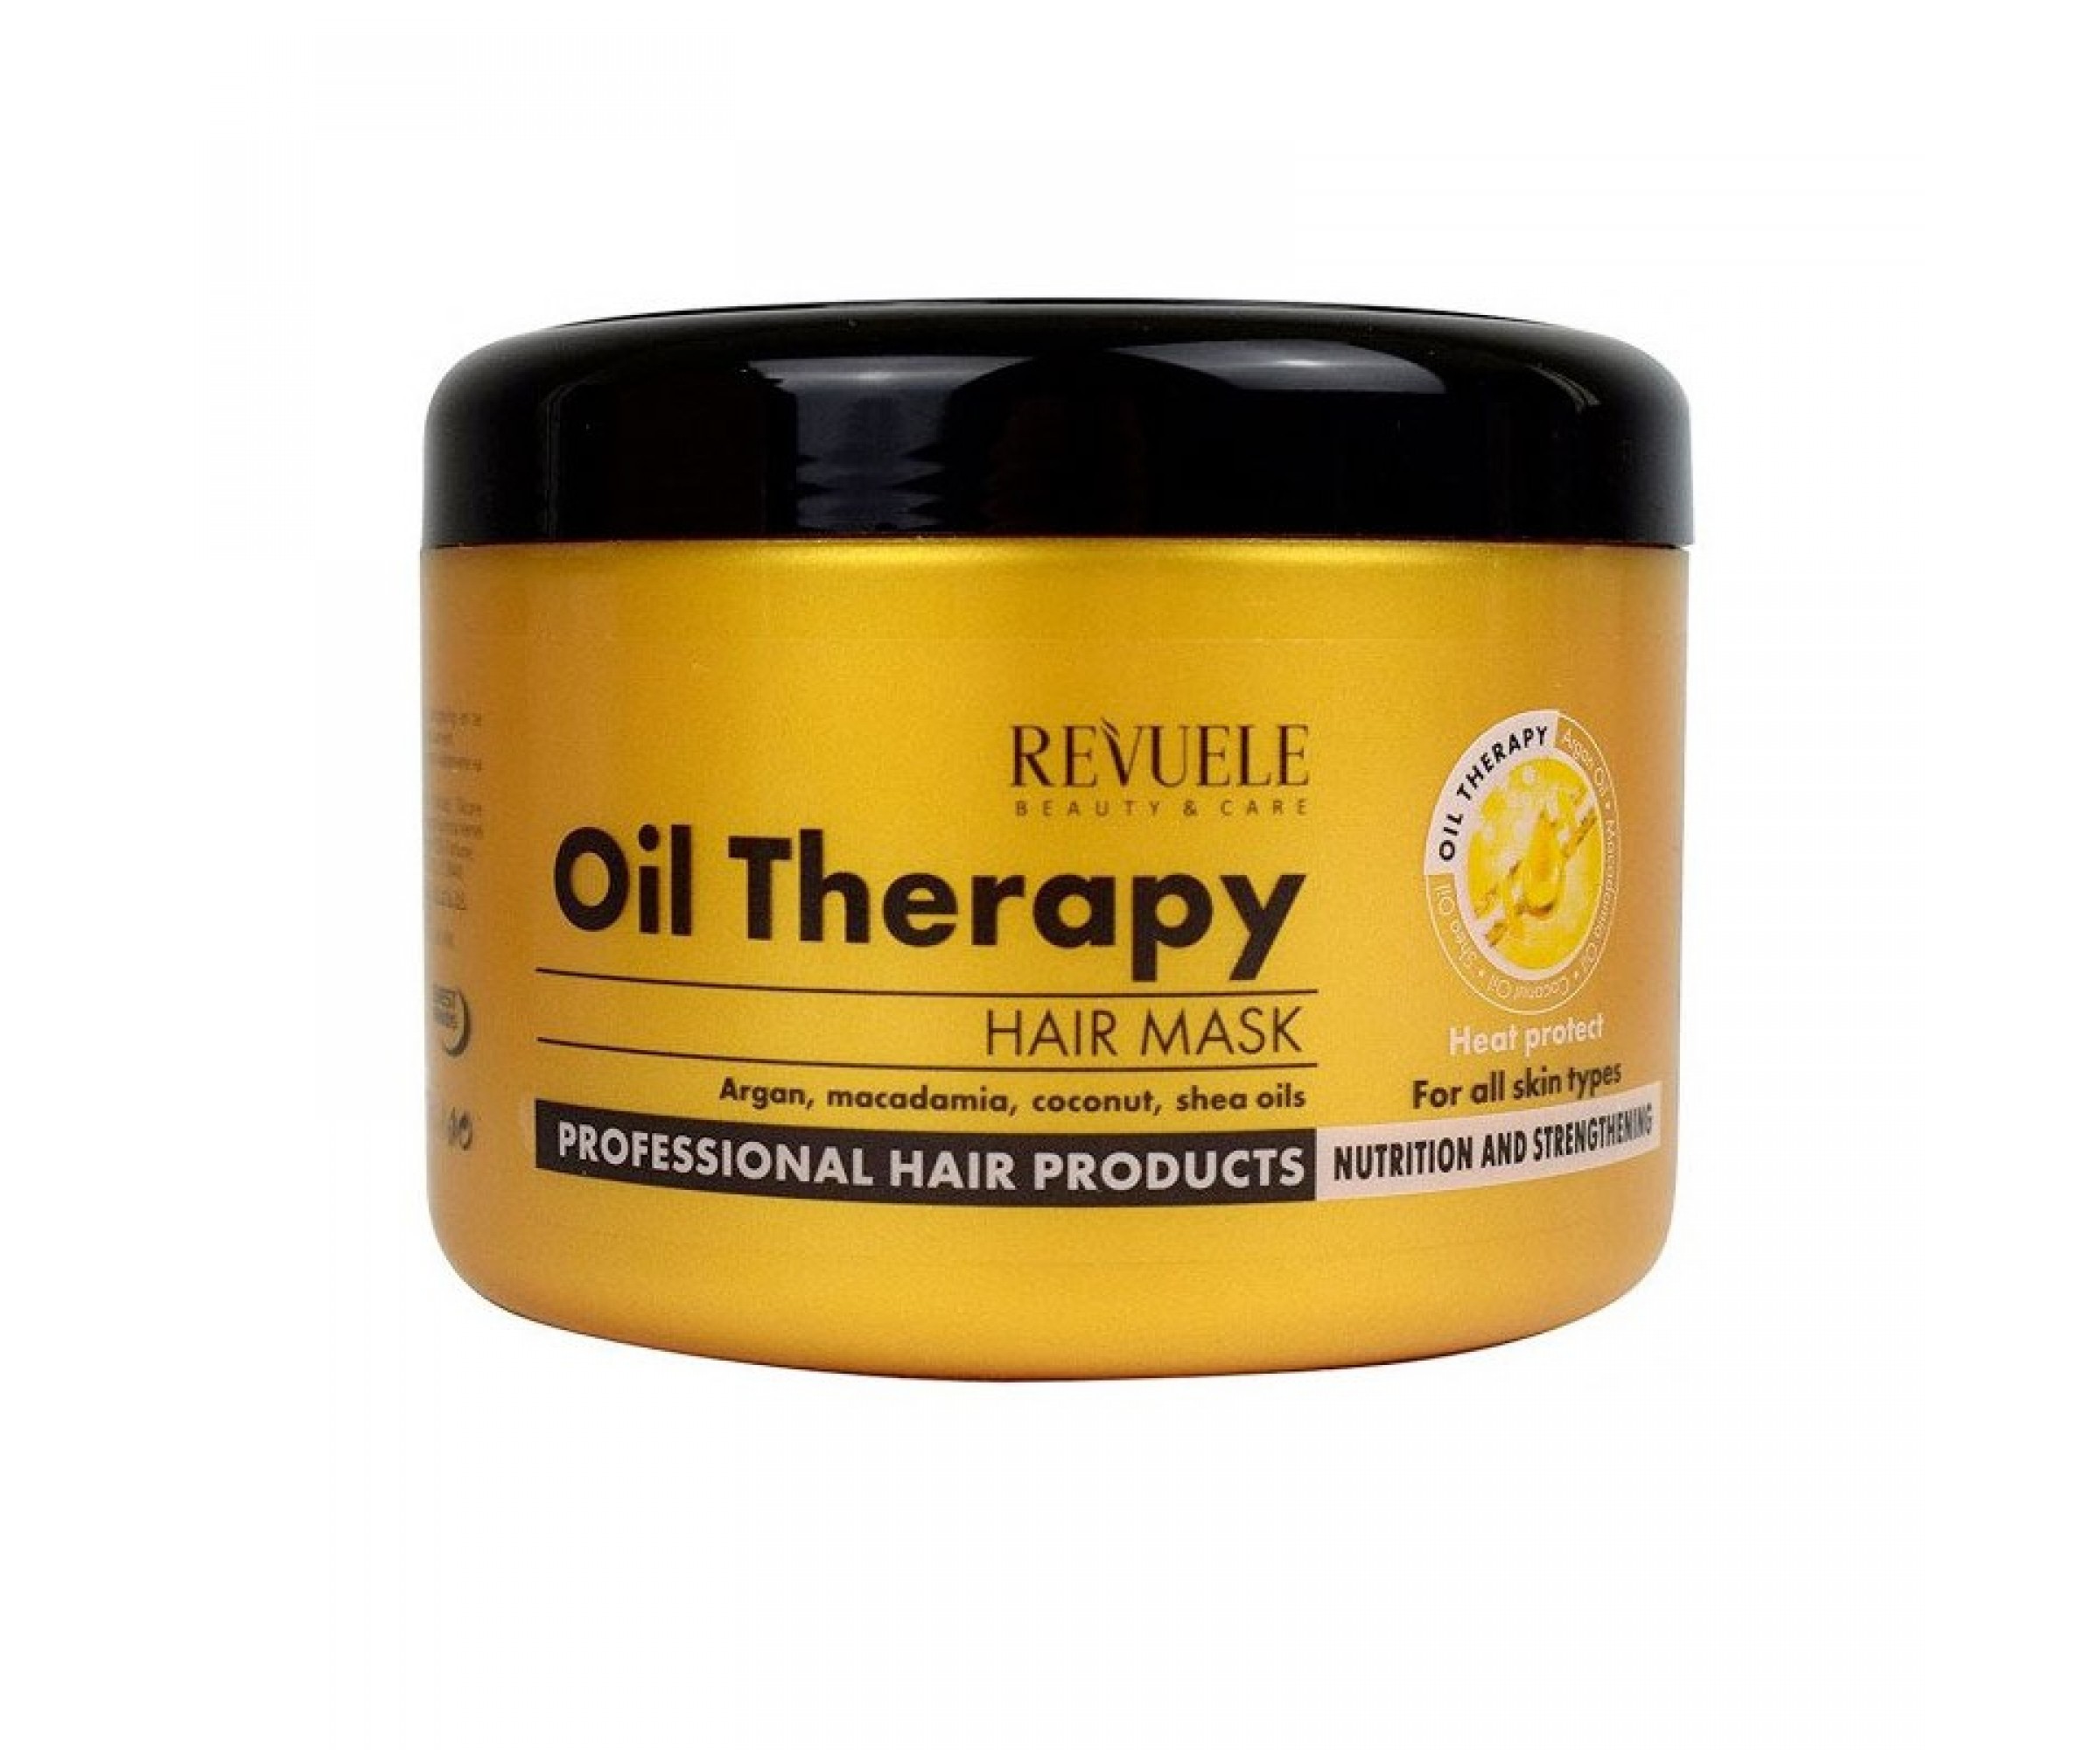 Revuele Hair Mask Oil Therapy With Argan Oil, Macadamia, Coconut And Shea Oils